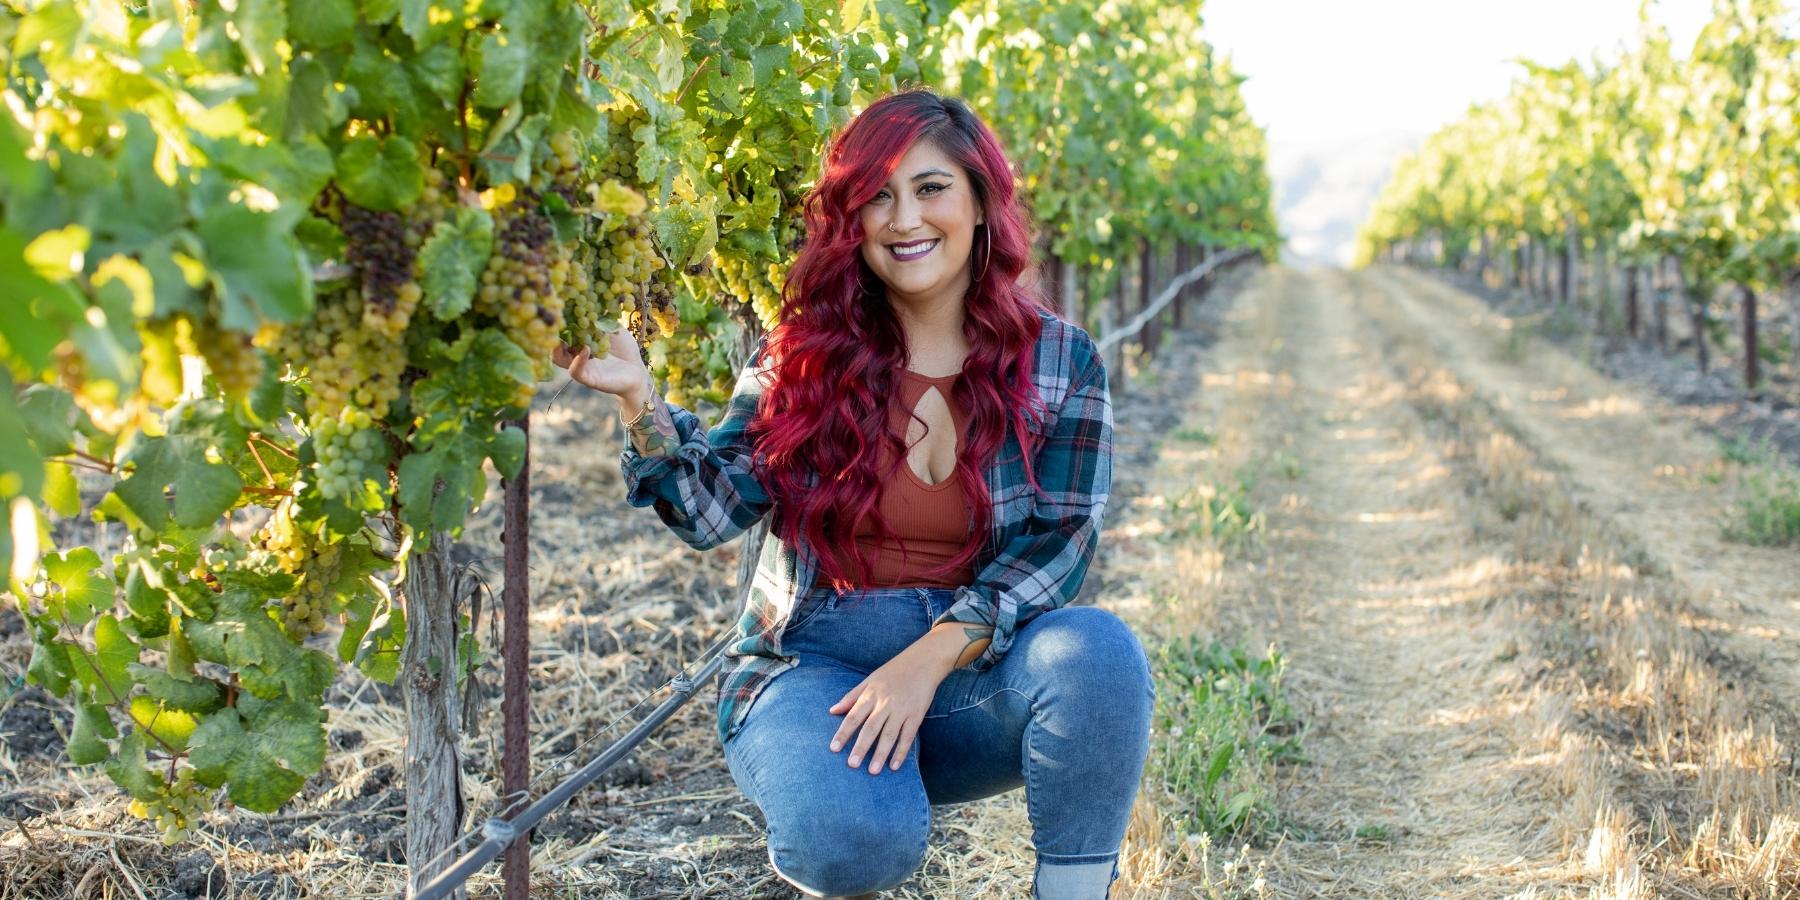 WEV client, Nancy Ulloa working in a vineyard for her business, Ulloa Cellars